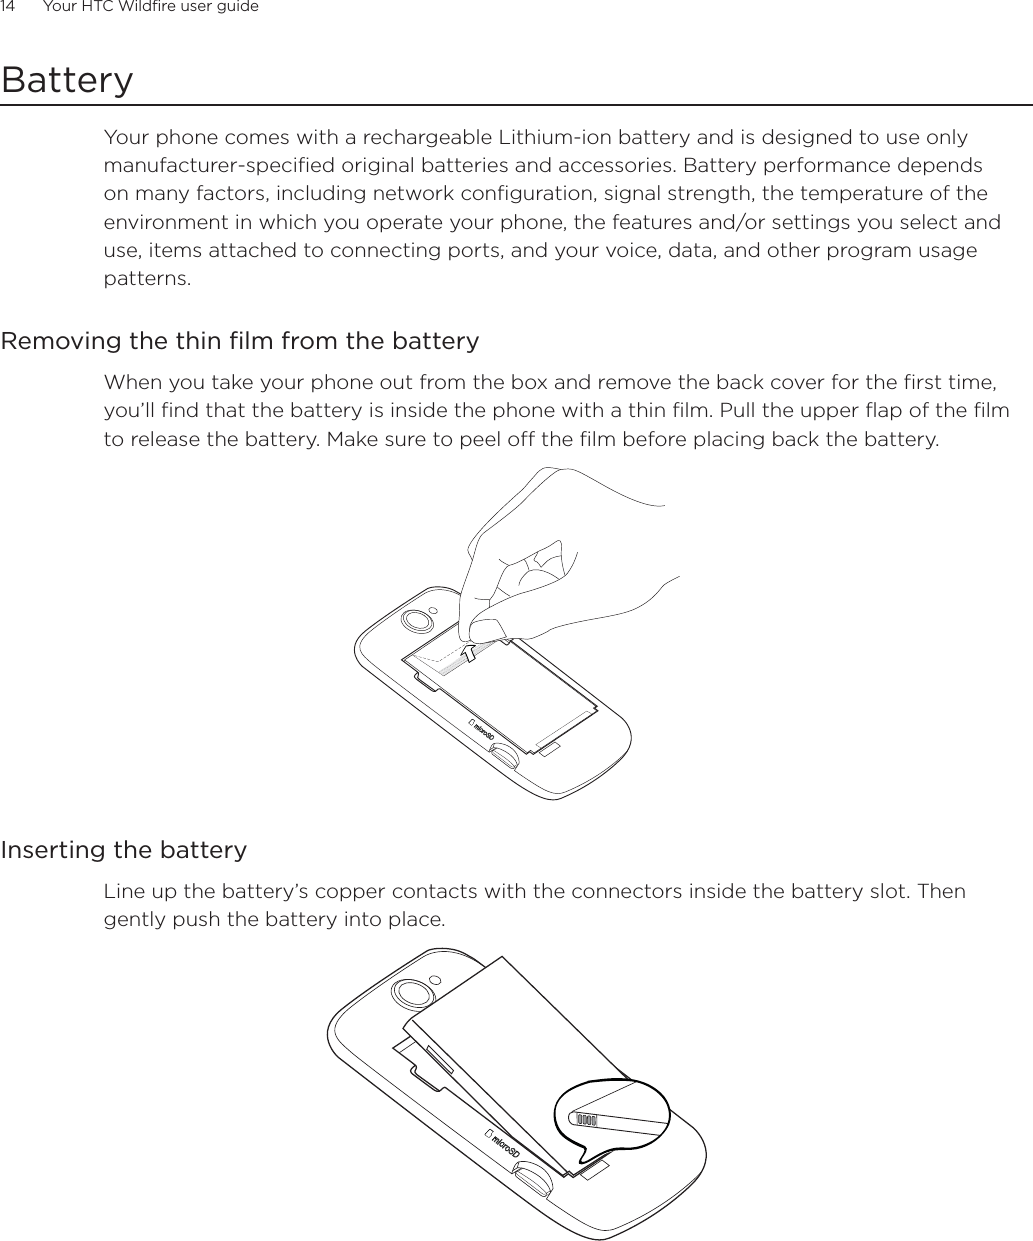 14      Your HTC Wildfire user guide      BatteryYour phone comes with a rechargeable Lithium-ion battery and is designed to use only manufacturer-specified original batteries and accessories. Battery performance depends on many factors, including network configuration, signal strength, the temperature of the environment in which you operate your phone, the features and/or settings you select and use, items attached to connecting ports, and your voice, data, and other program usage patterns.Removing the thin film from the batteryWhen you take your phone out from the box and remove the back cover for the first time, you’ll find that the battery is inside the phone with a thin film. Pull the upper flap of the film to release the battery. Make sure to peel off the film before placing back the battery.Inserting the batteryLine up the battery’s copper contacts with the connectors inside the battery slot. Then gently push the battery into place.